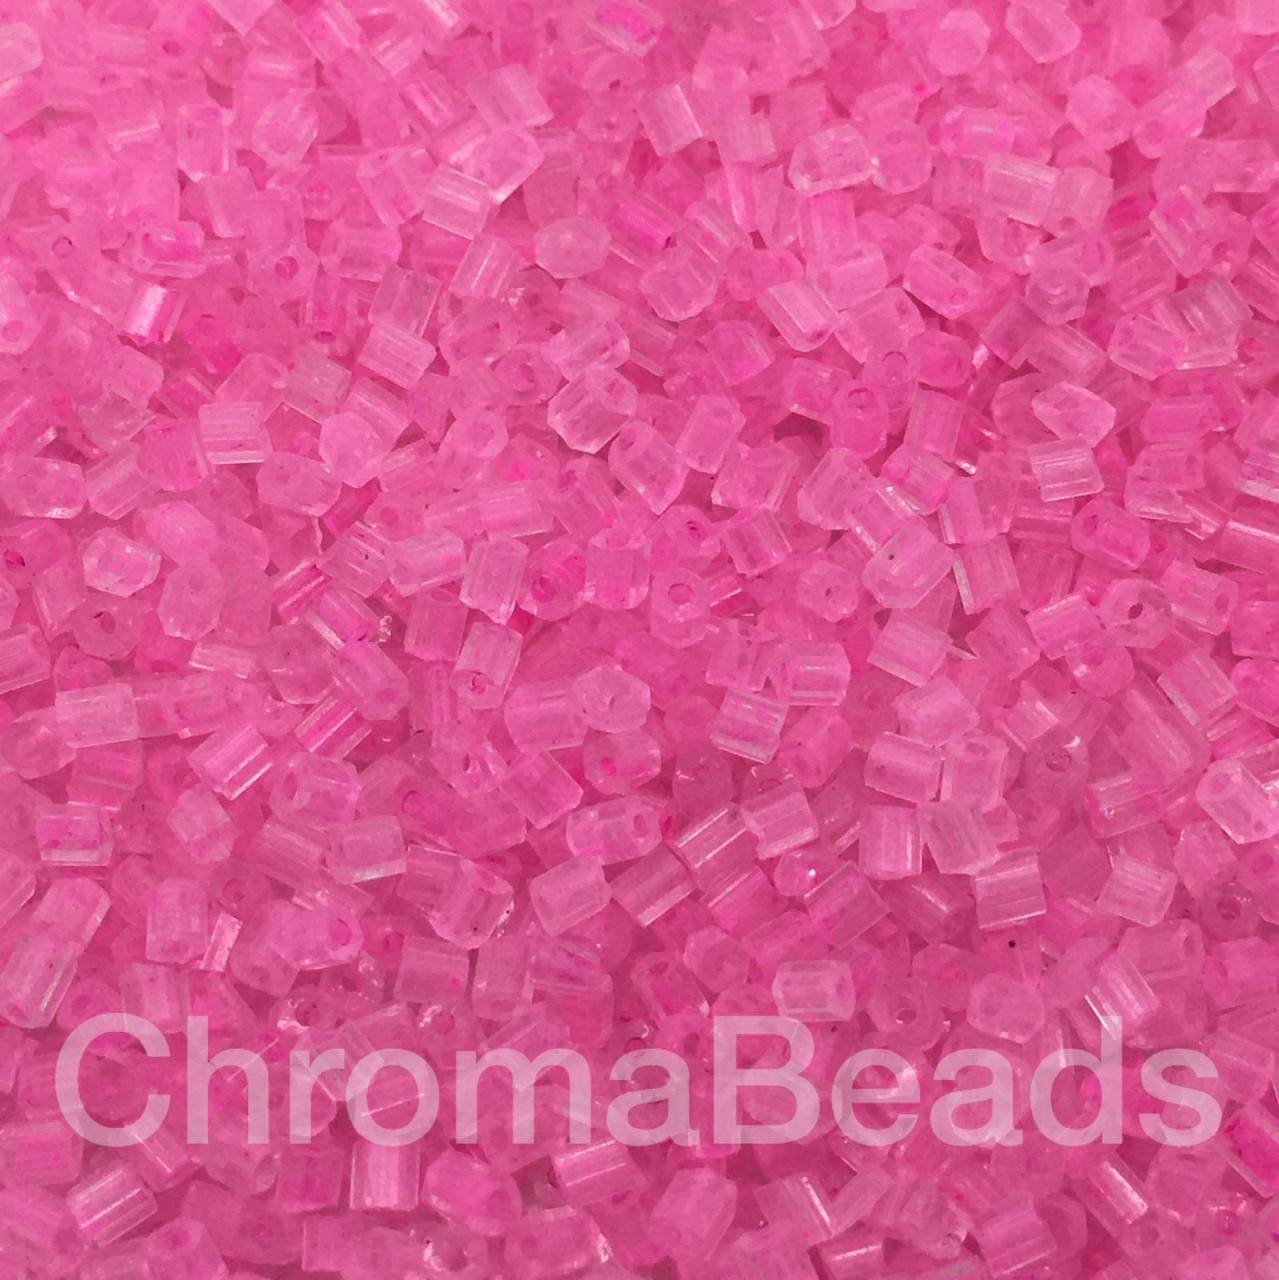 50g glass HEX seed beads - Candy Pink Inside - size 11/0 (approx 2mm)